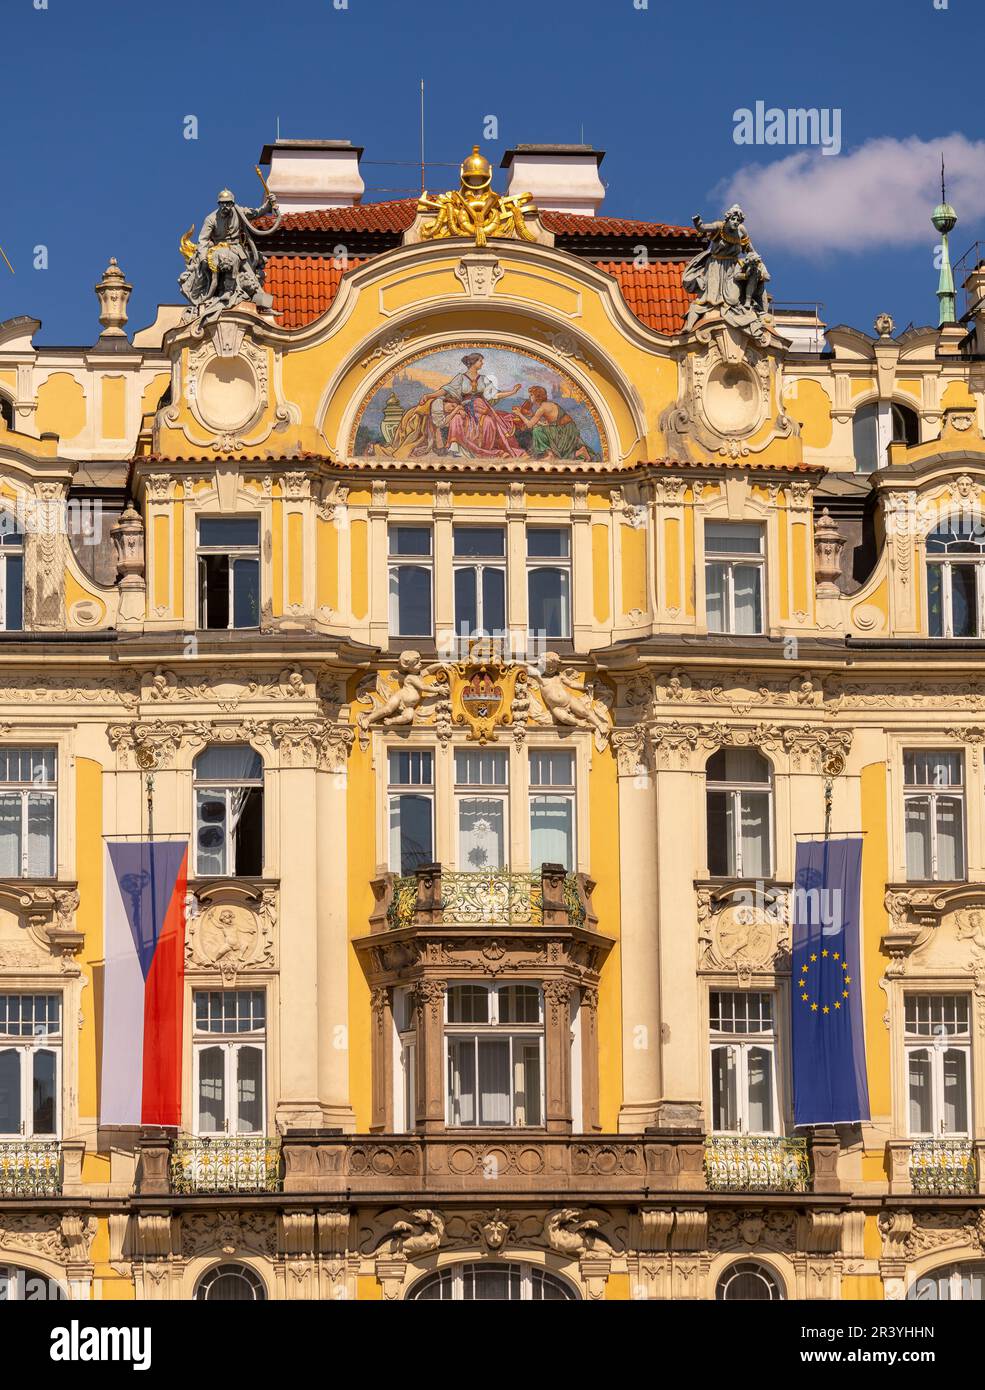 OLD TOWN SQUARE, PRAGUE, CZECH REPUBLIC, EUROPE - The architecture of the northern side of Old Town Square. Stock Photo